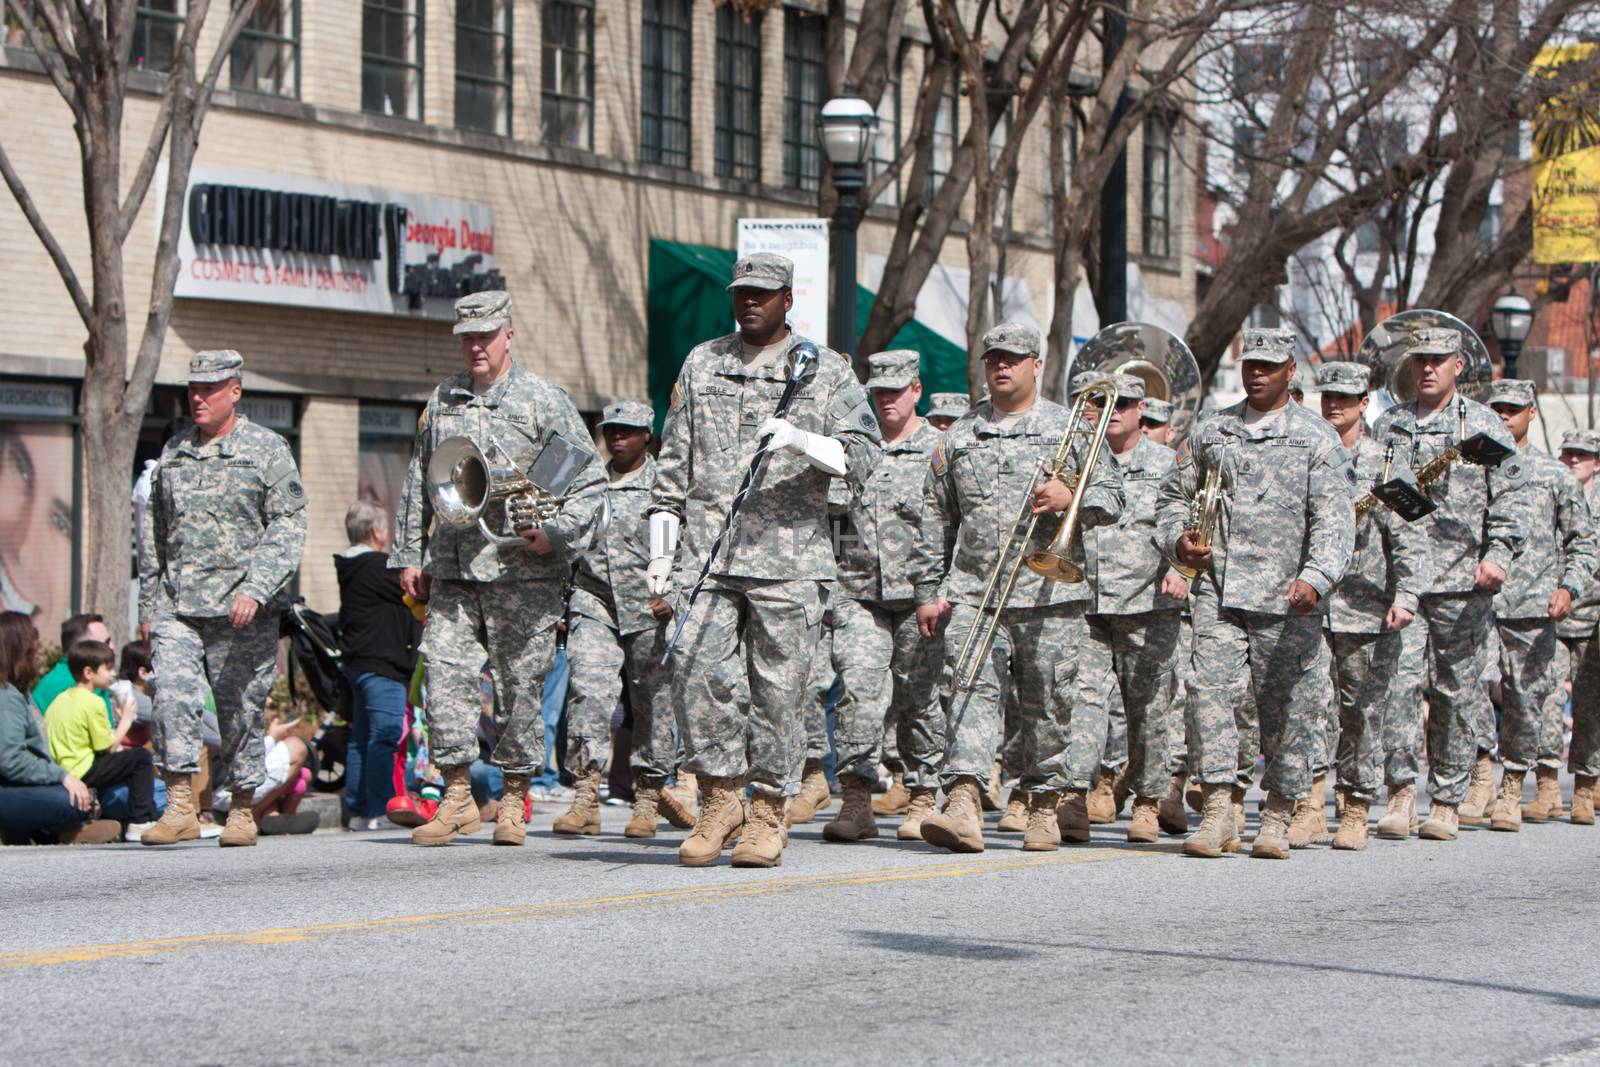 Army Band Marches In St. Patrick's Parade by BluIz60